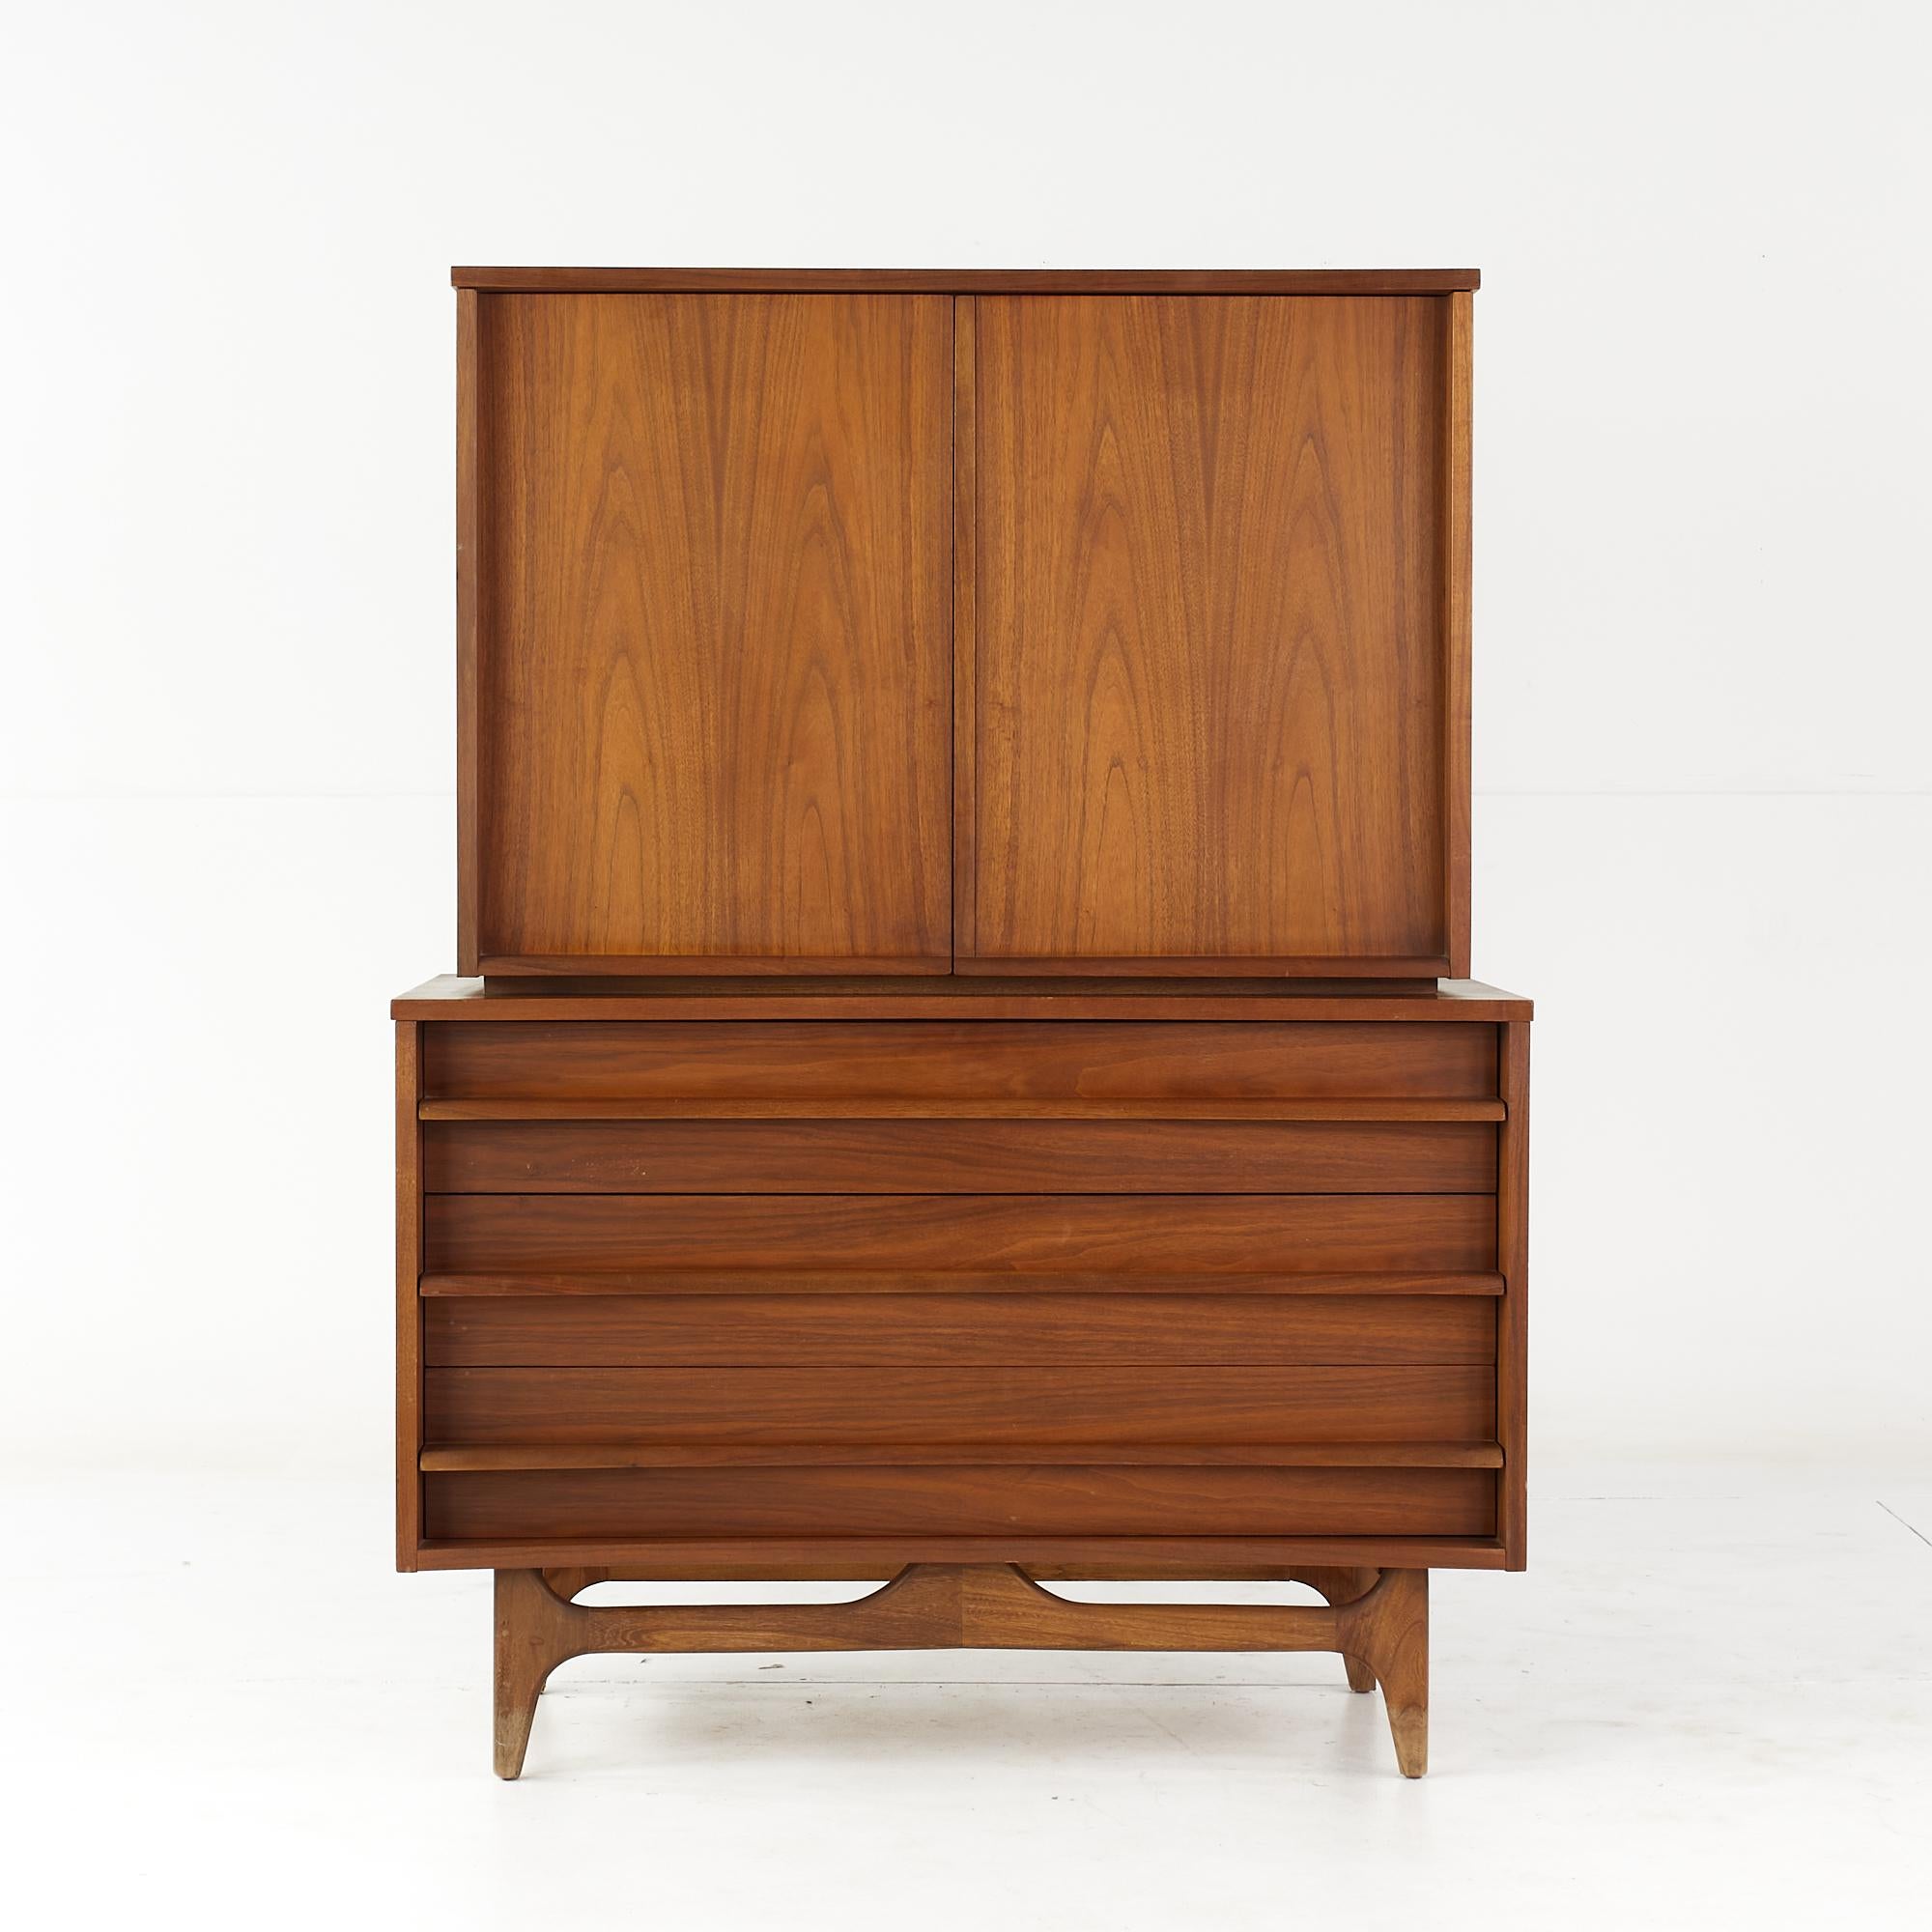 Young Manufacturing Mid Century walnut curved front highboy dresser

This dresser measures: 42 wide x 20.5 deep x 56.5 inches high

All pieces of furniture can be had in what we call restored vintage condition. That means the piece is restored